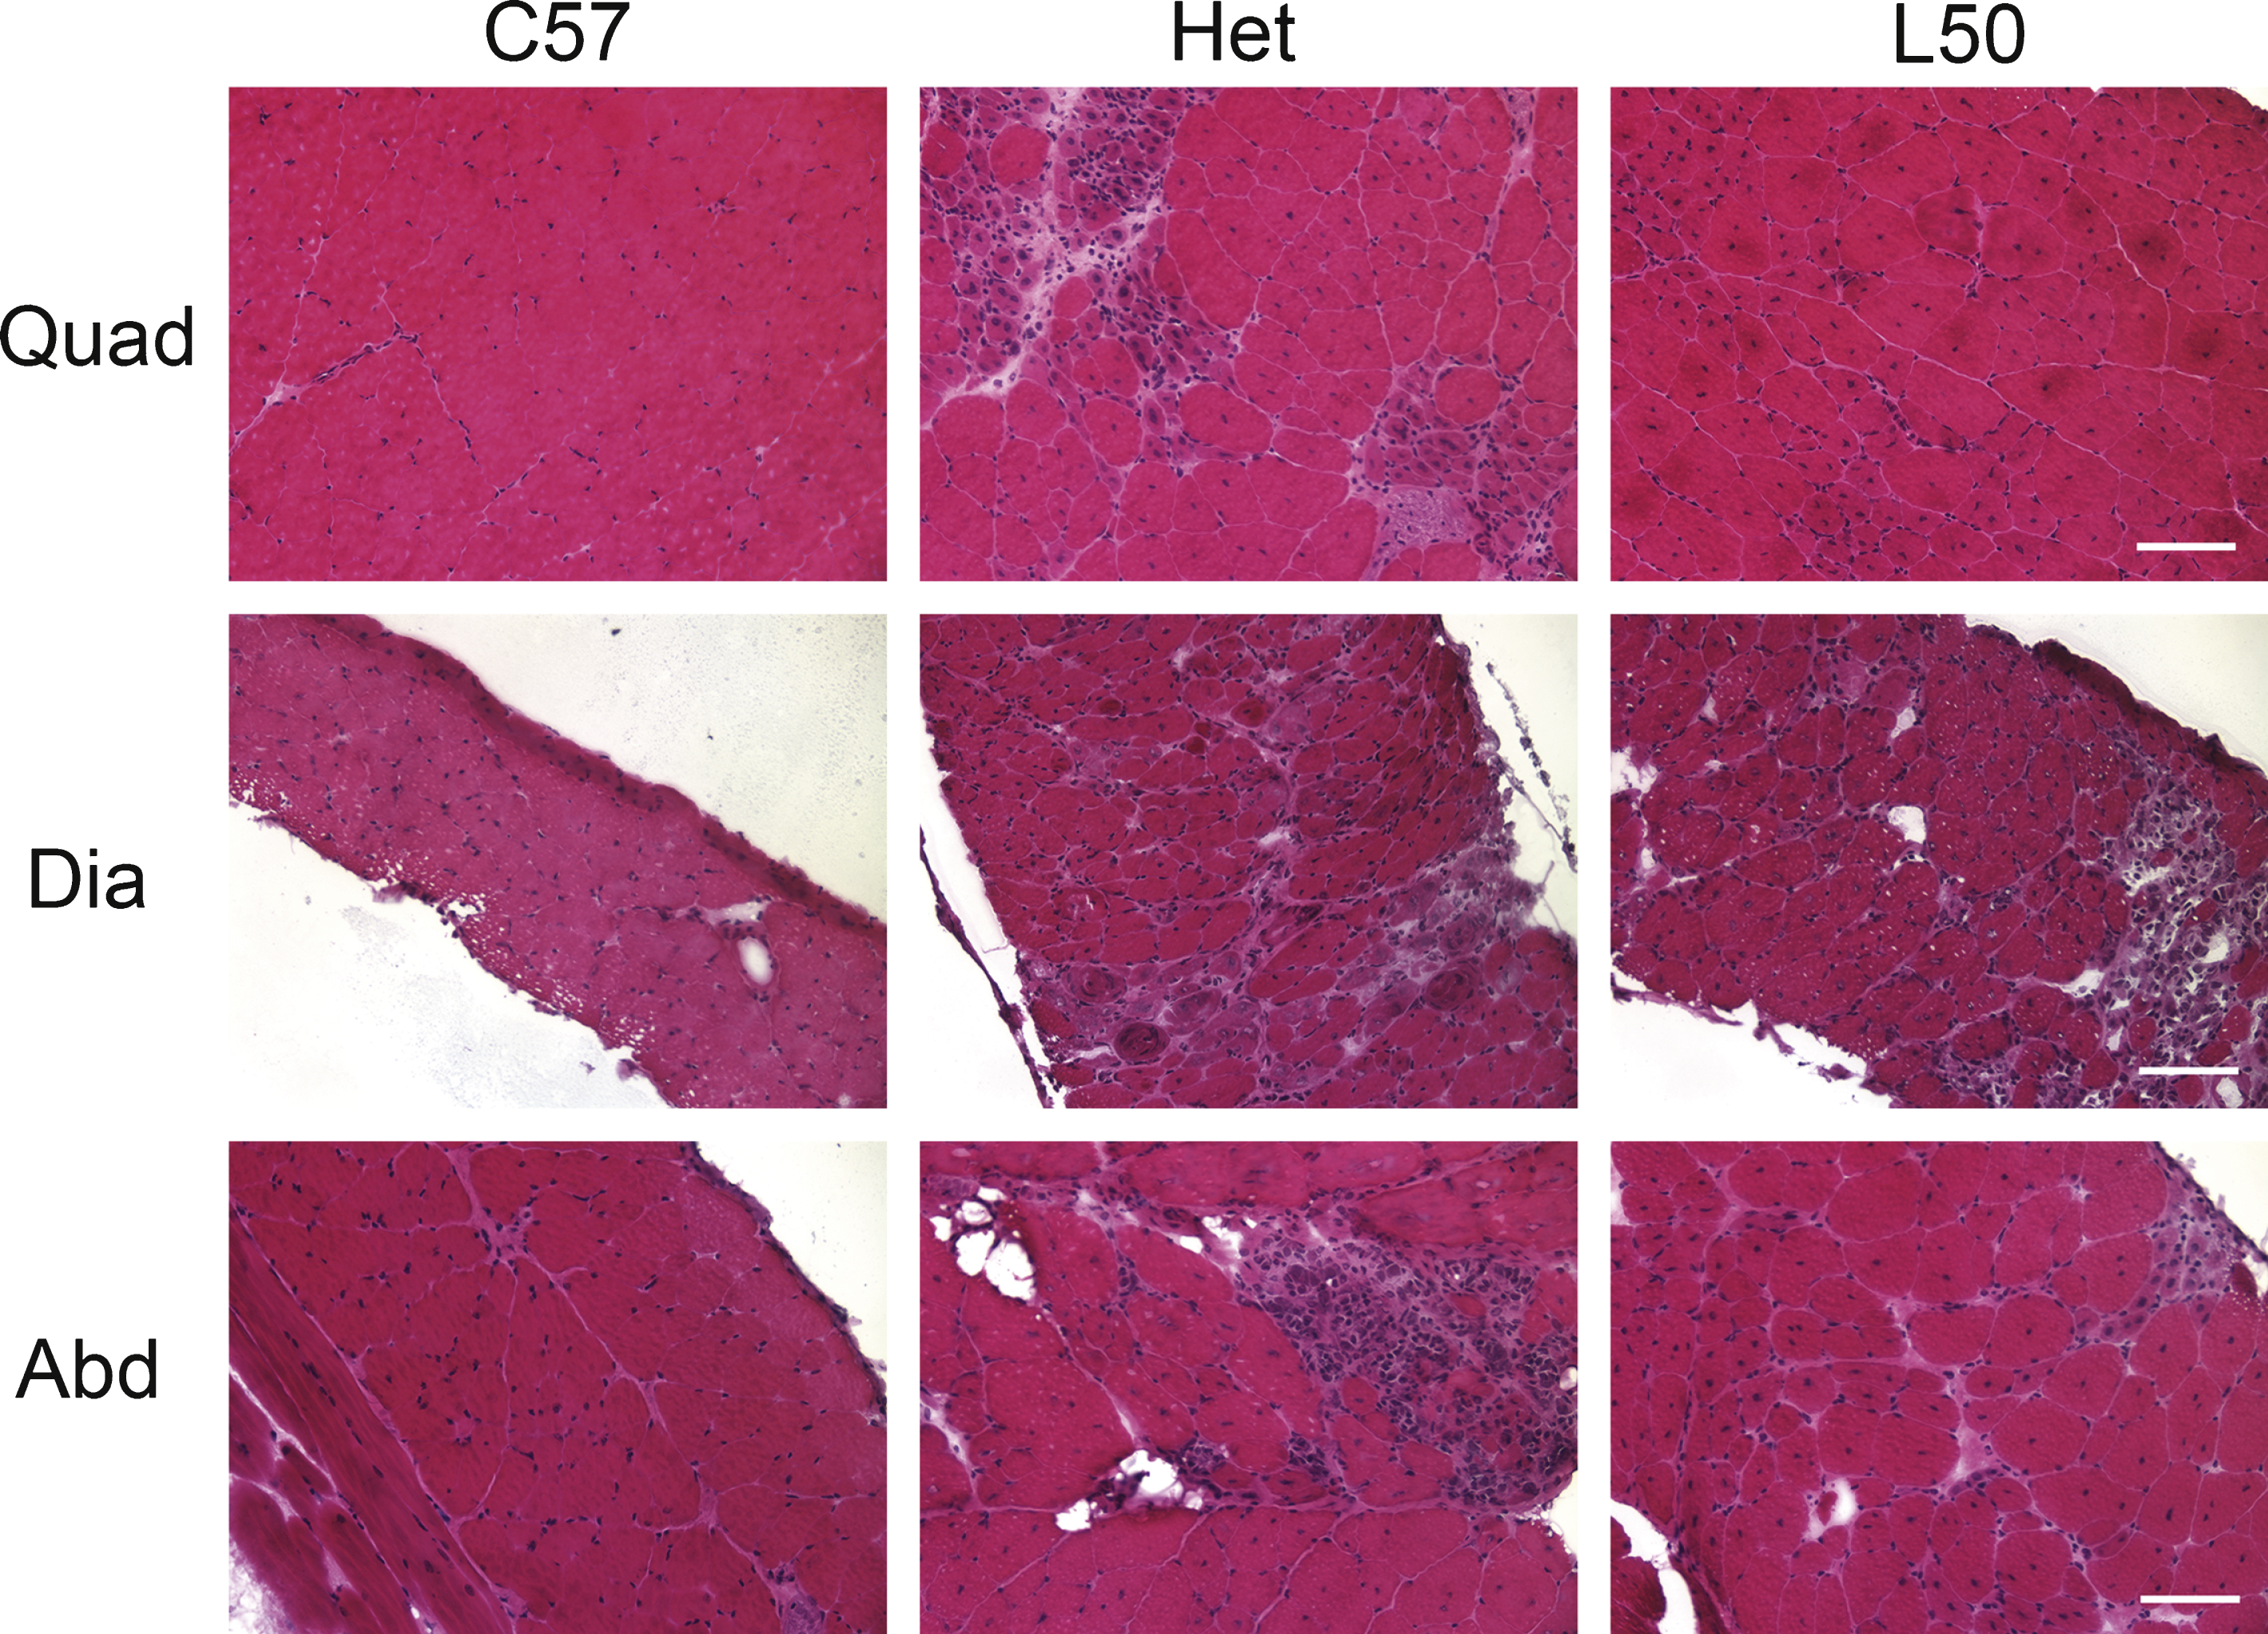 Hematoxylin and eosin stained representative quadriceps, diaphragm and abdominal sections. Het mice treated with 50 mg/kg × day of lisinopril had less observable overall muscle damage in quadriceps (Quad), diaphragm (Dia) and abdominal (Abd) sections compared to untreated het mice. As expected, C57BL/10 wild-type control mice had no observable muscle damage in any of the muscle types. C57: C57BL/10 wild-type control mice (n = 10); Het: untreated het mice (n = 10); L50: het mice treated with 50 mg/kg × day of lisinopril (n = 6). Bar = 100μm.